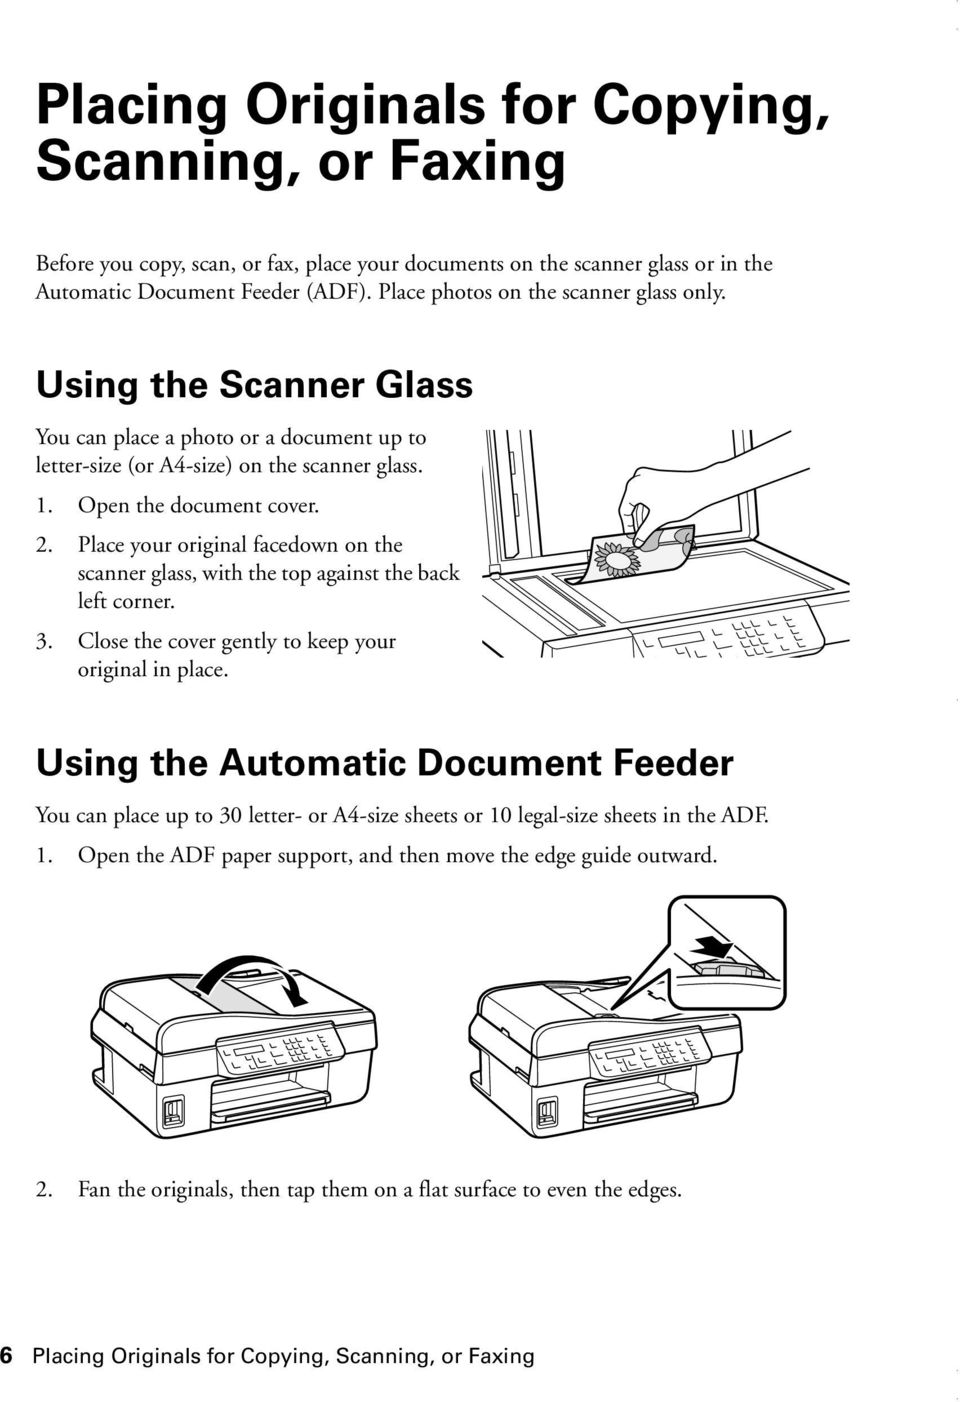 Place your original facedown on the scanner glass, with the top against the back left corner. 3. Close the cover gently to keep your original in place.